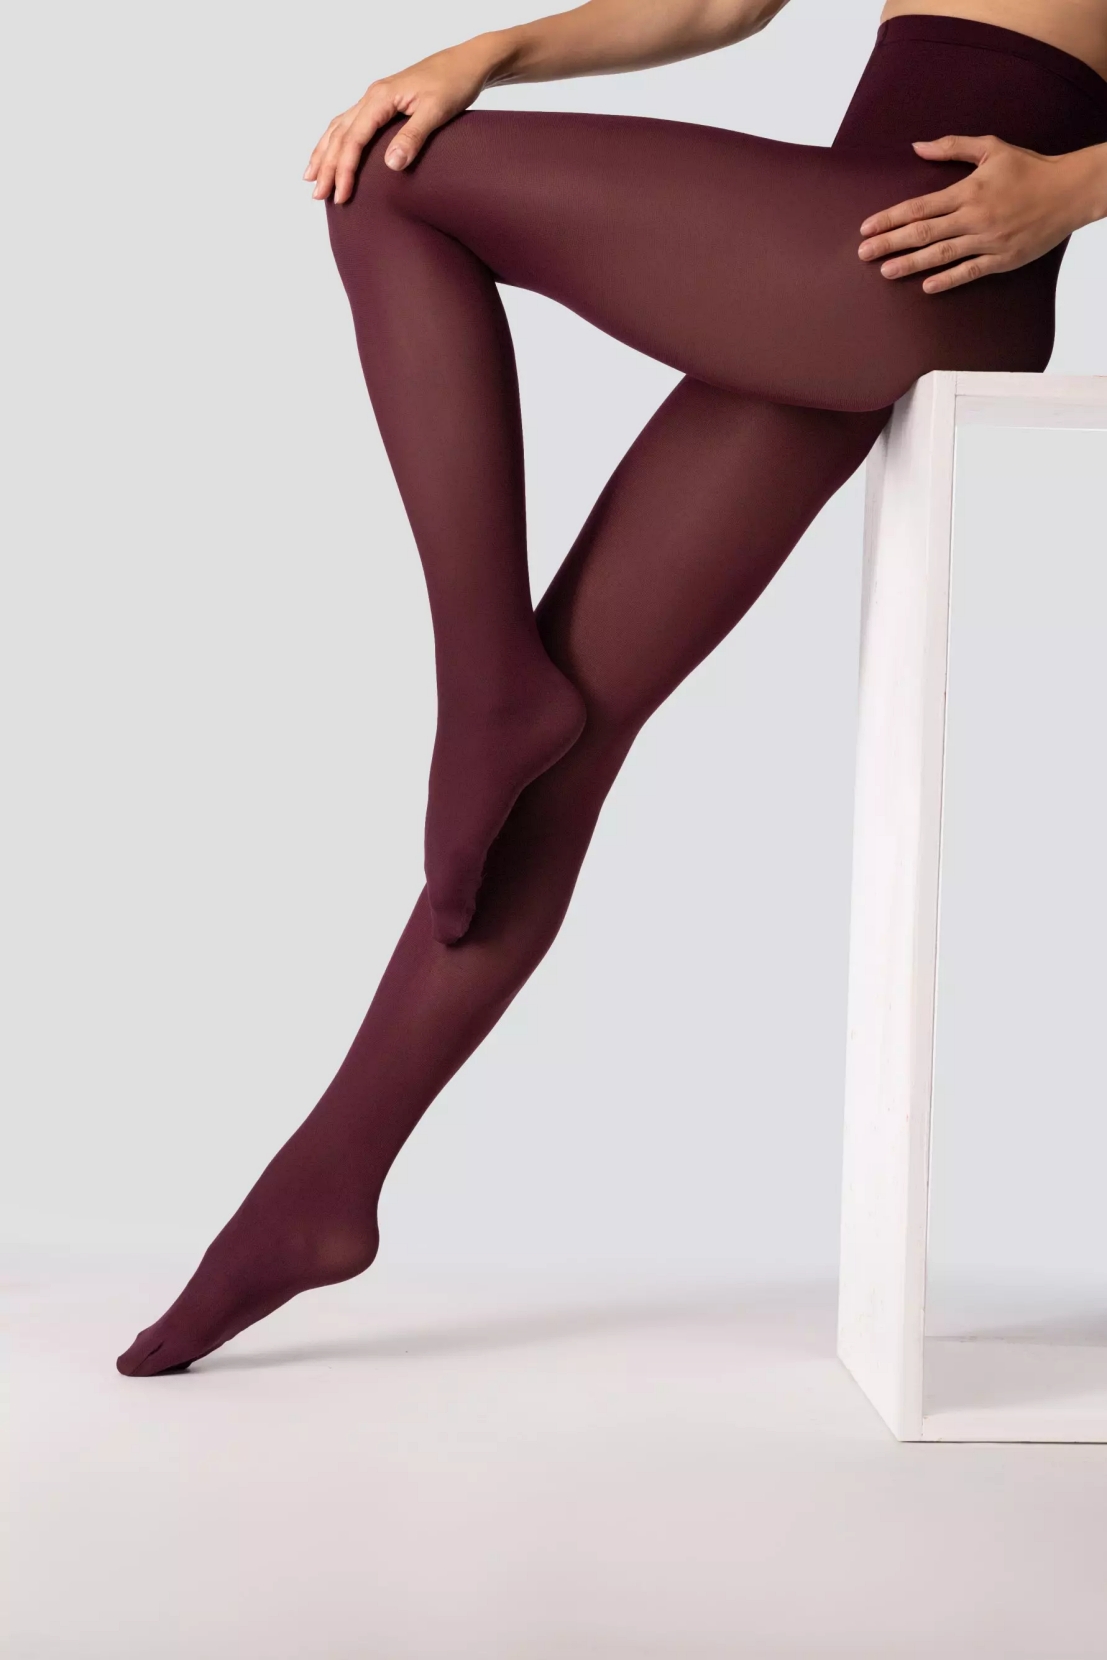 warme panty-soft-3d-60-red-wine-2